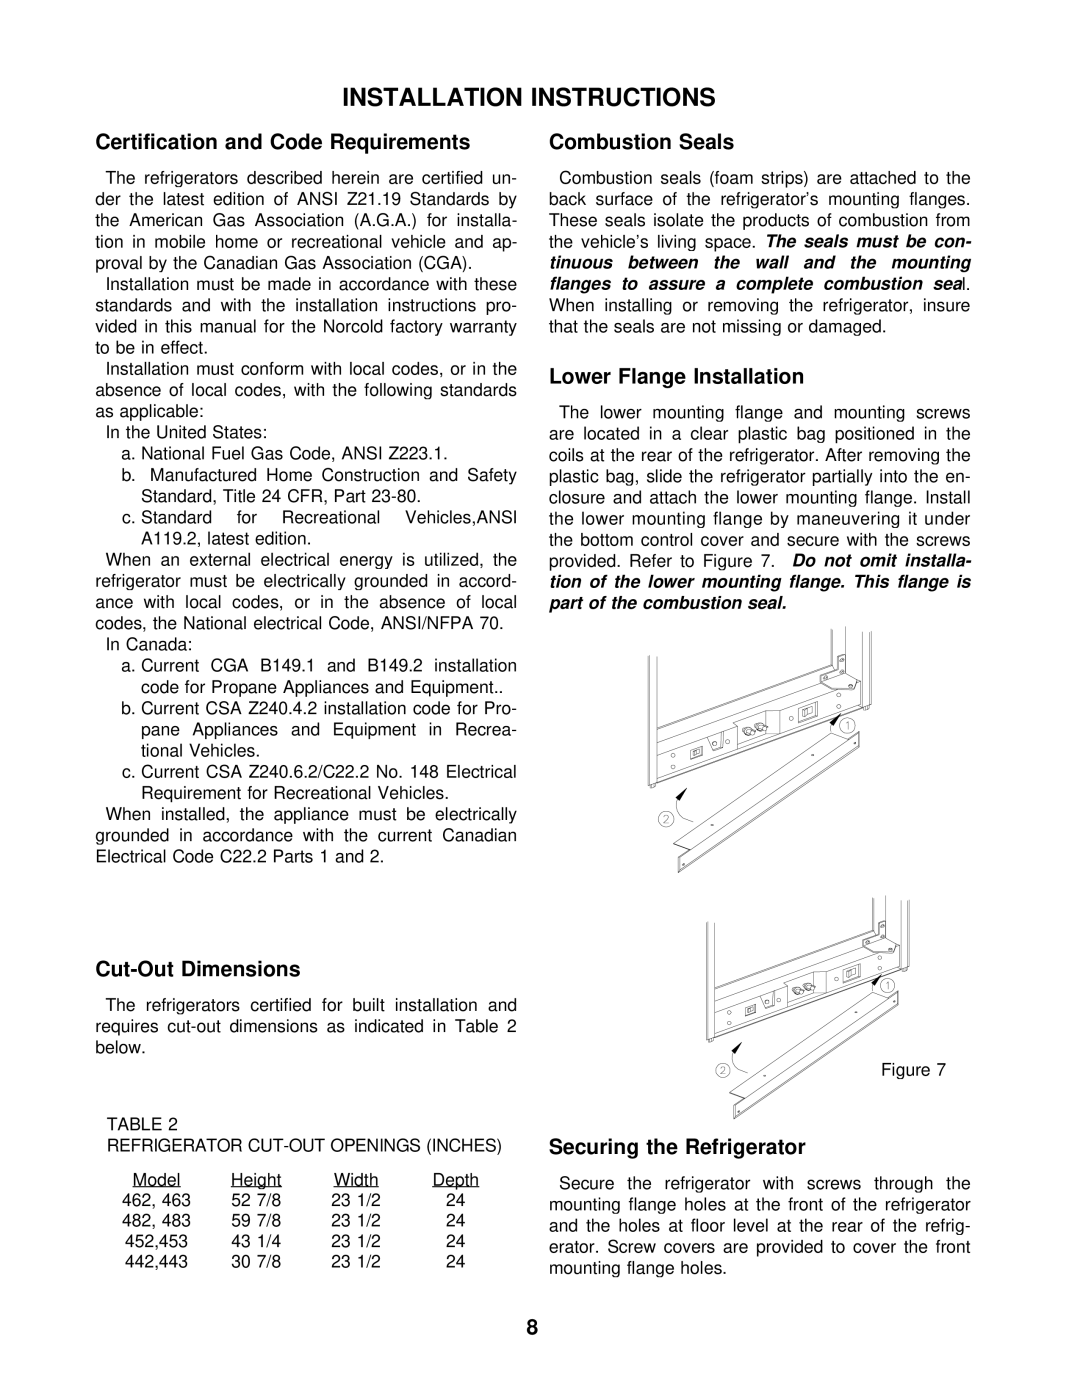 Norcold 483 Installation Instructions, Certification and Code Requirements, Combustion Seals, Lower Flange Installation 